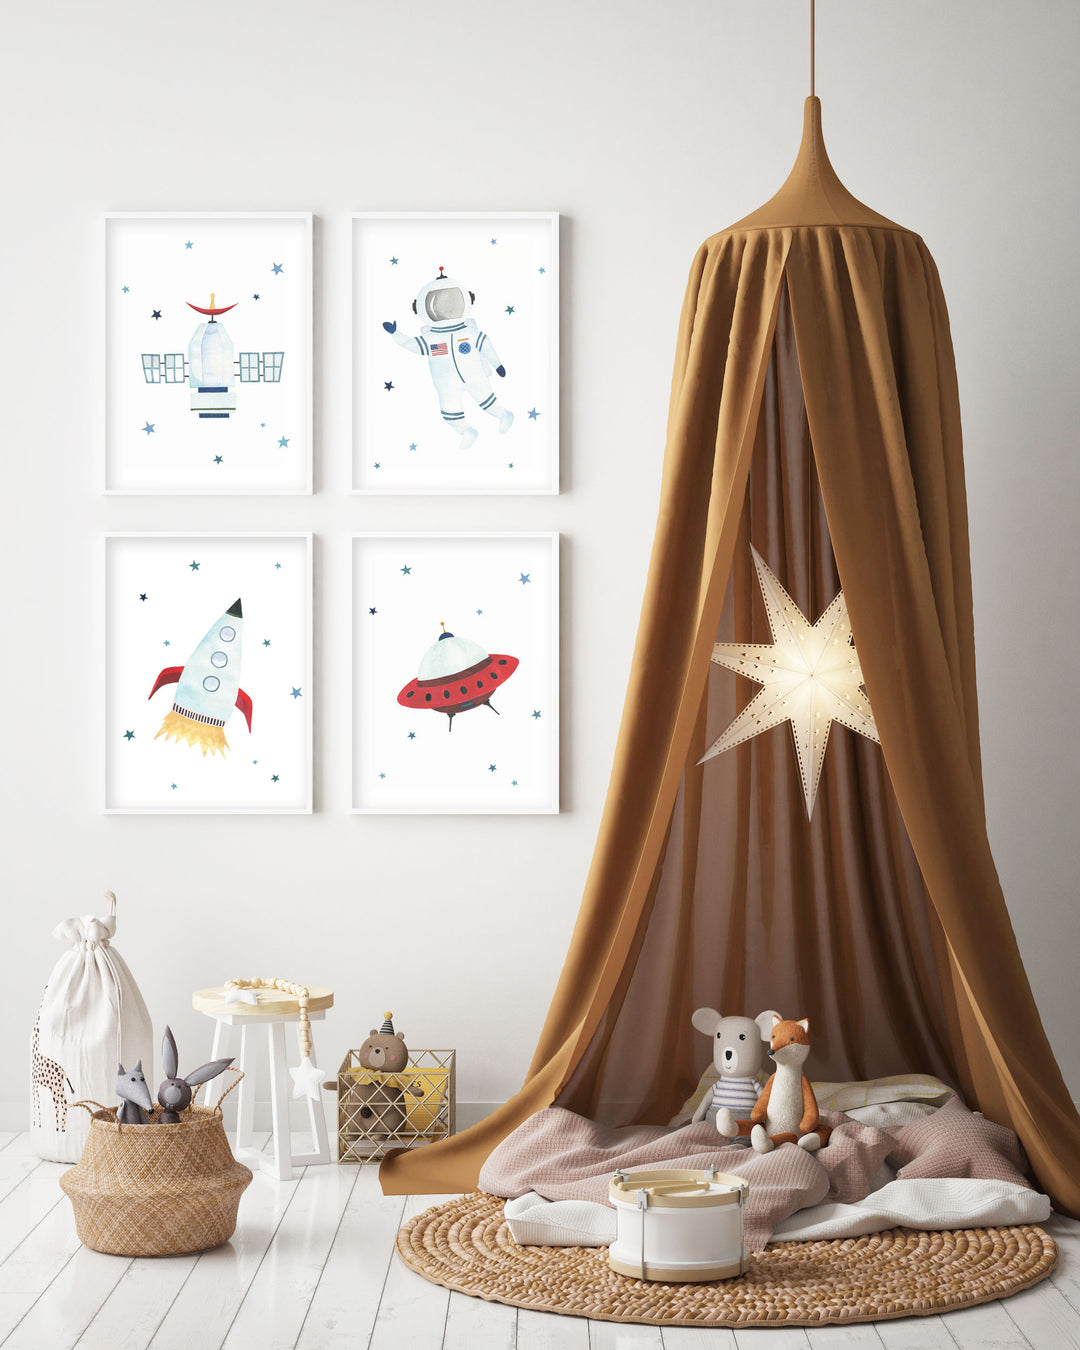 Satellite Print - Outer Space Nursery - The Small Art Project - Modern Nursery Prints